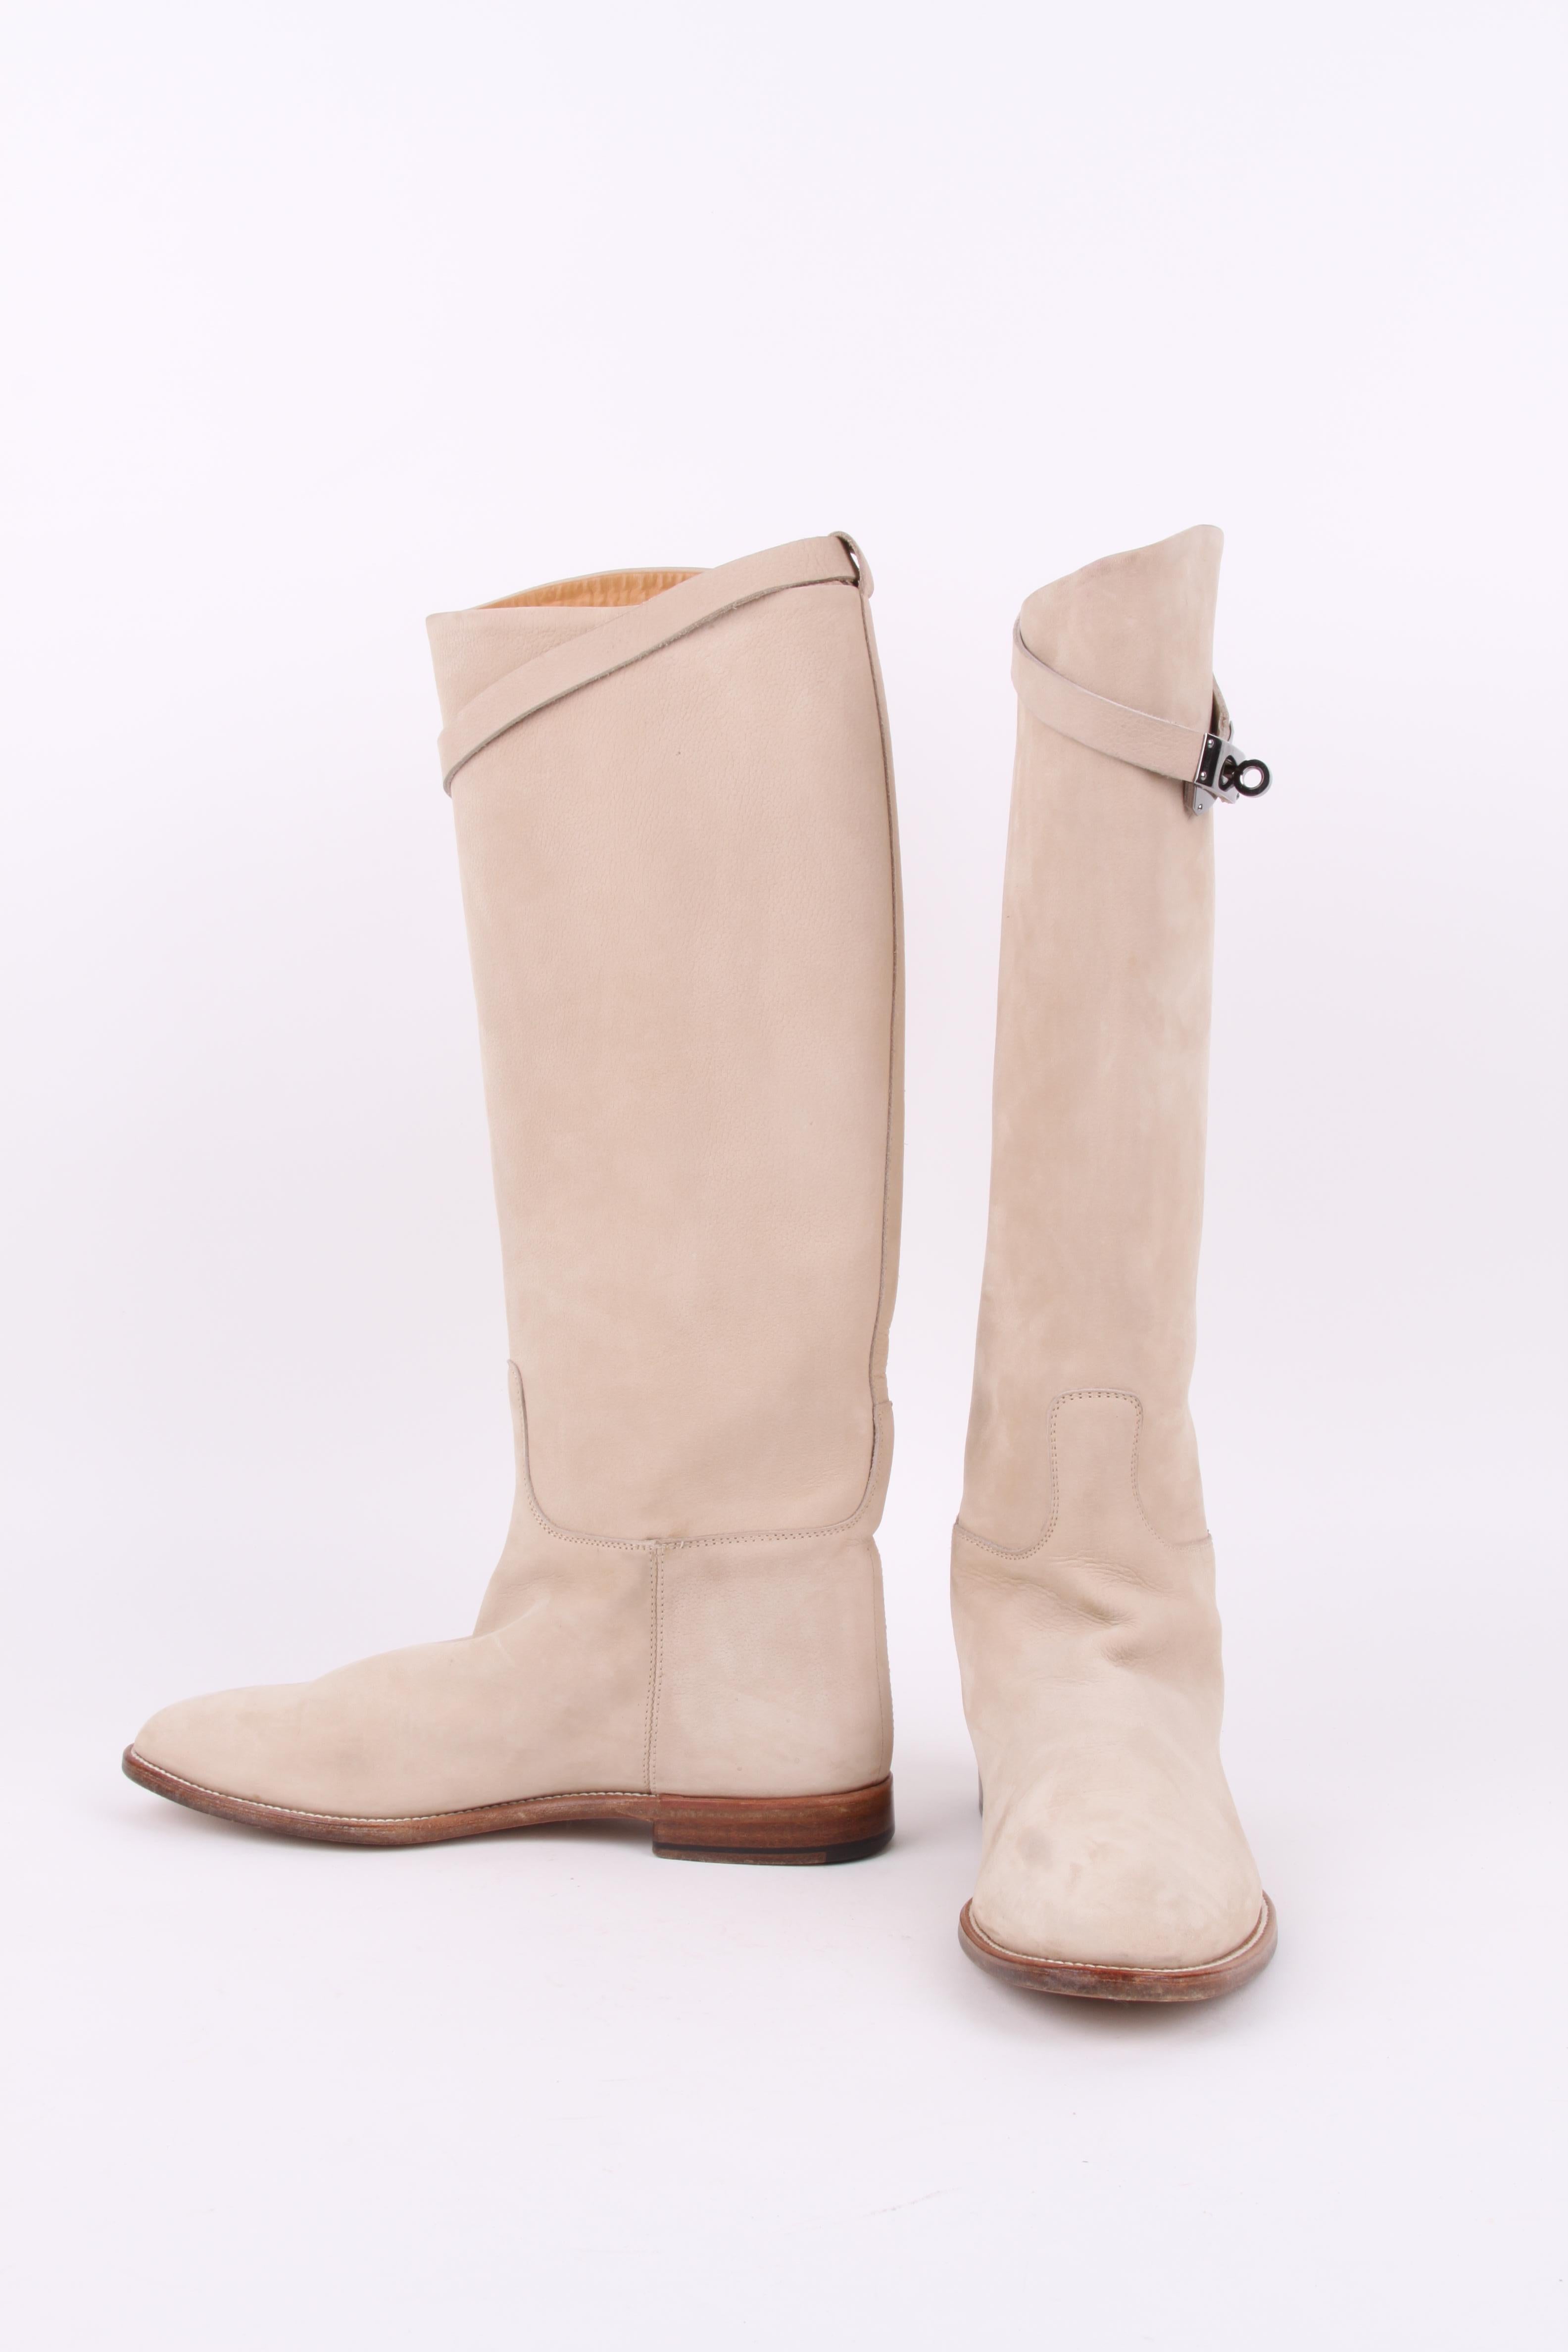 Hermès Jumping Riding Equestrian Leather Boots - beige In Good Condition For Sale In Baarn, NL